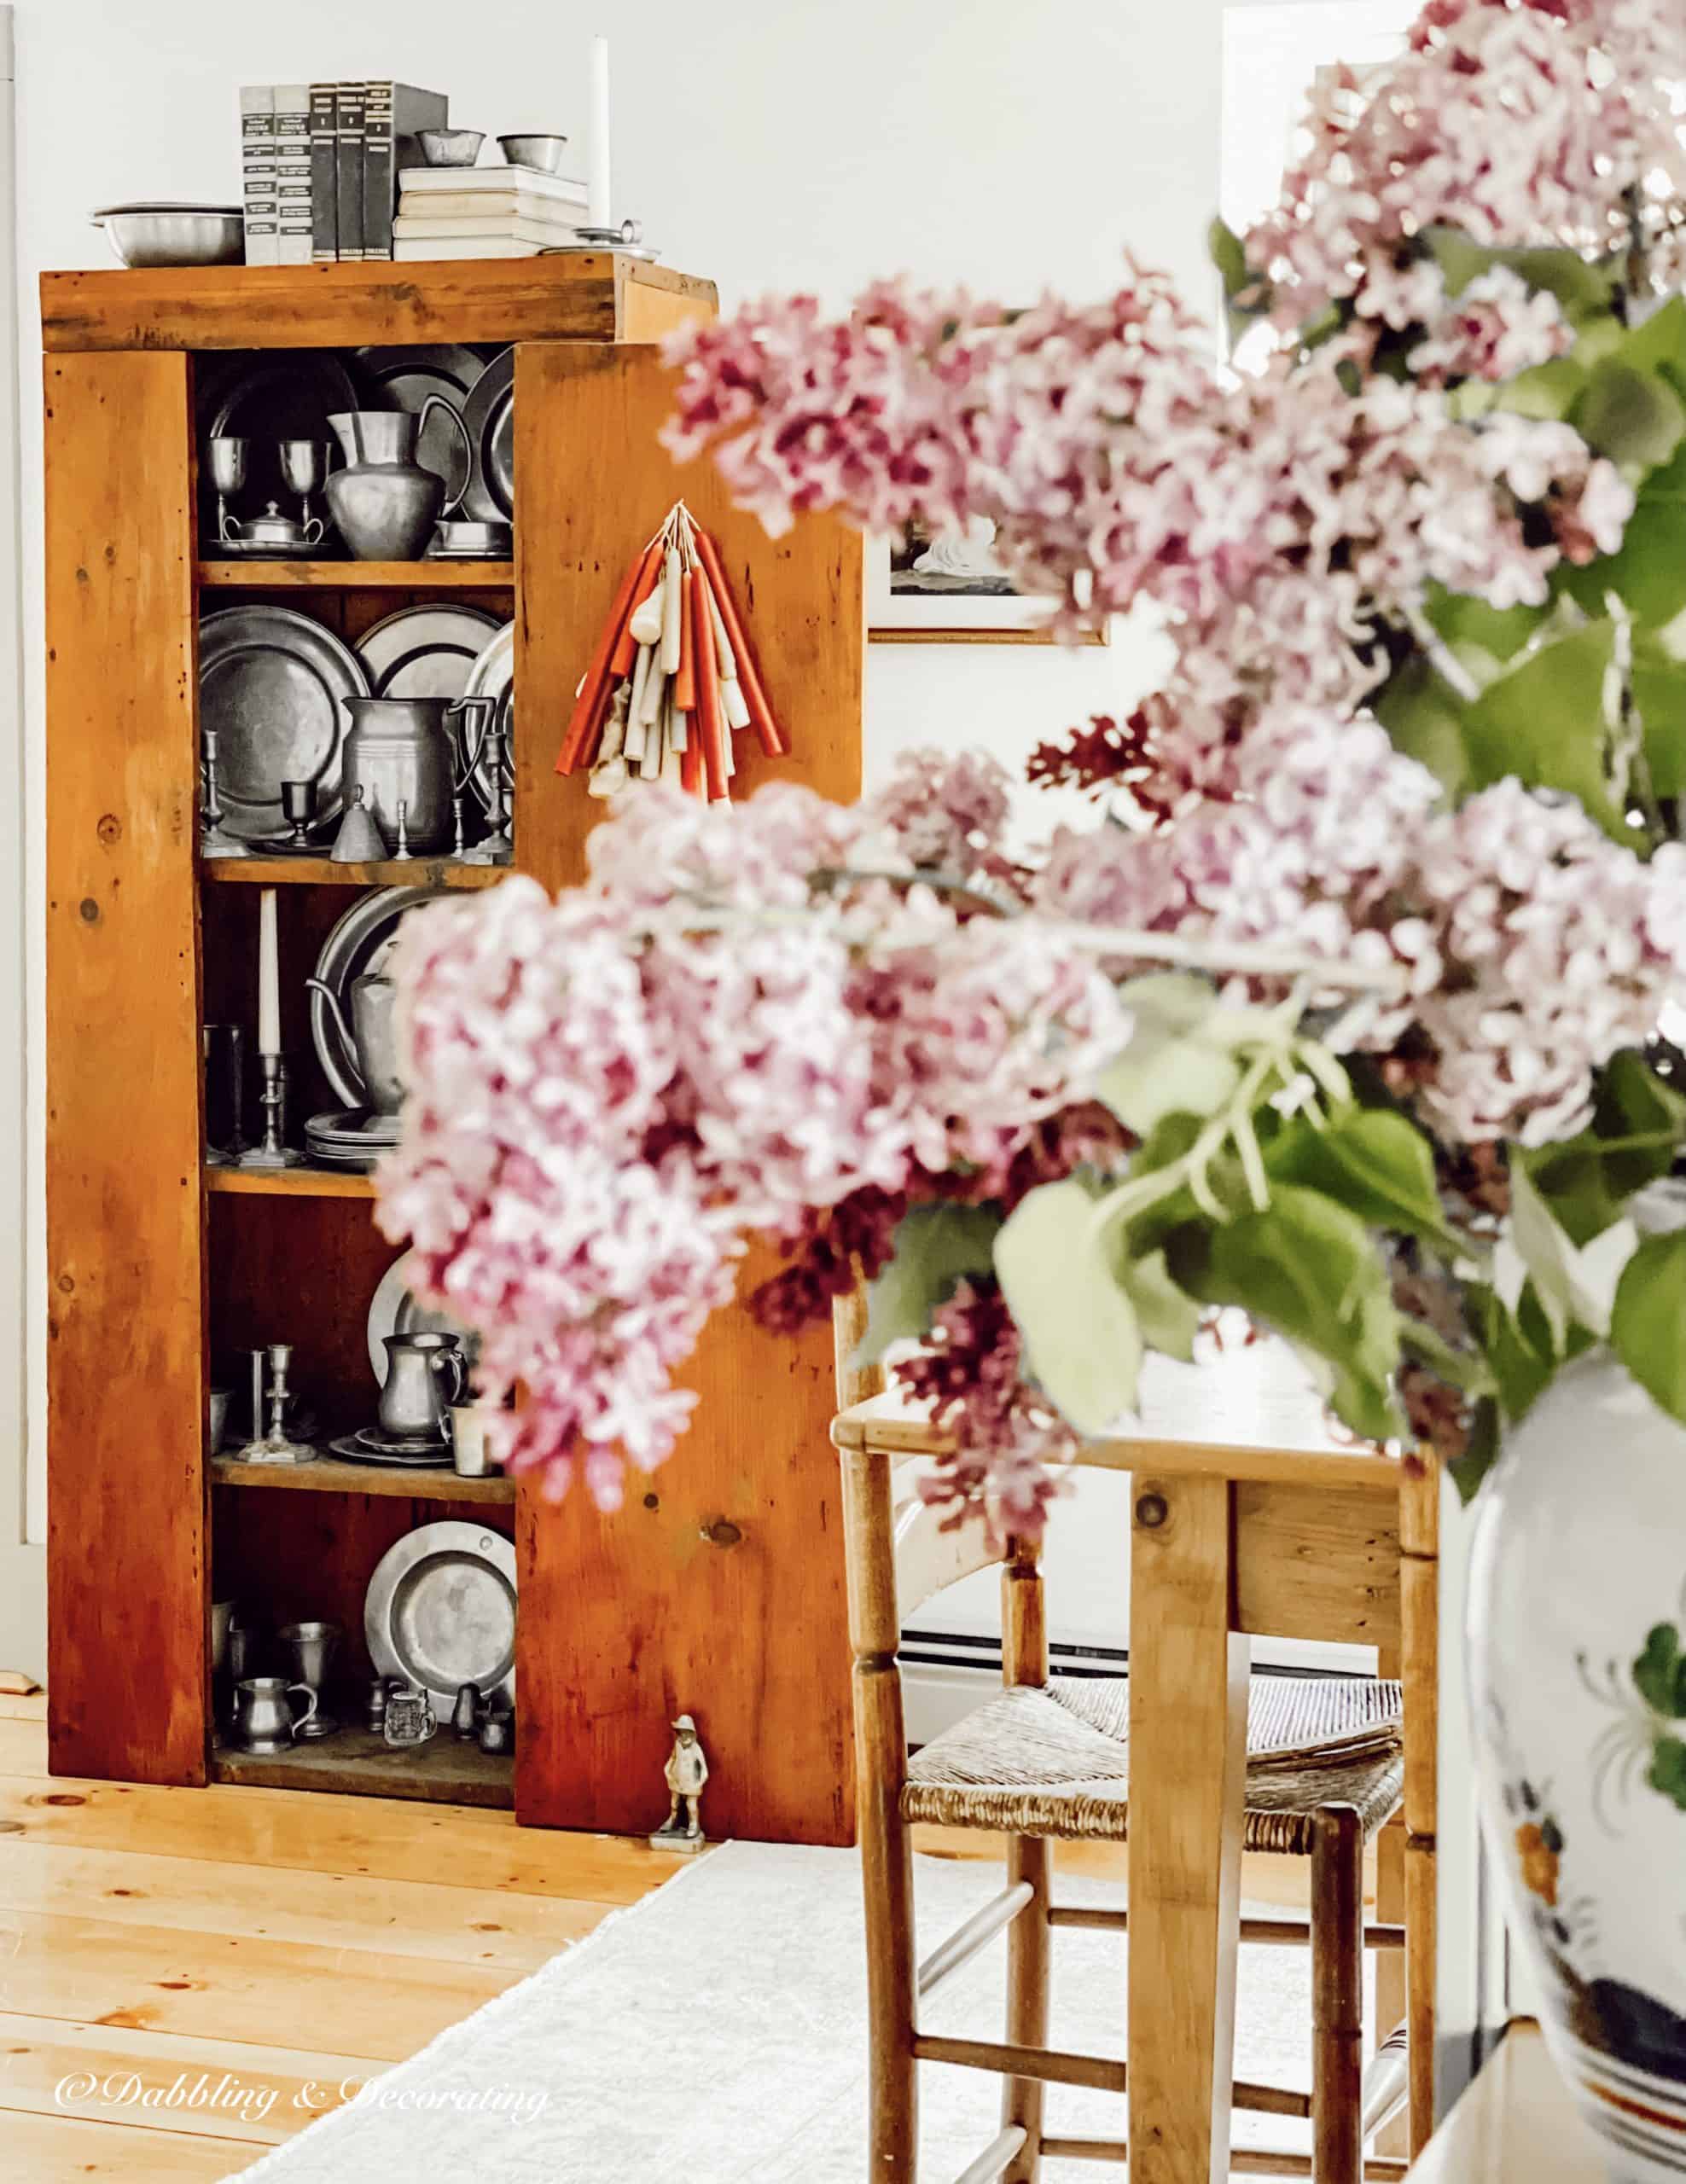 A vintage vase of lilac flowers in a wooden cabinet, perfect for thrifty decorating.